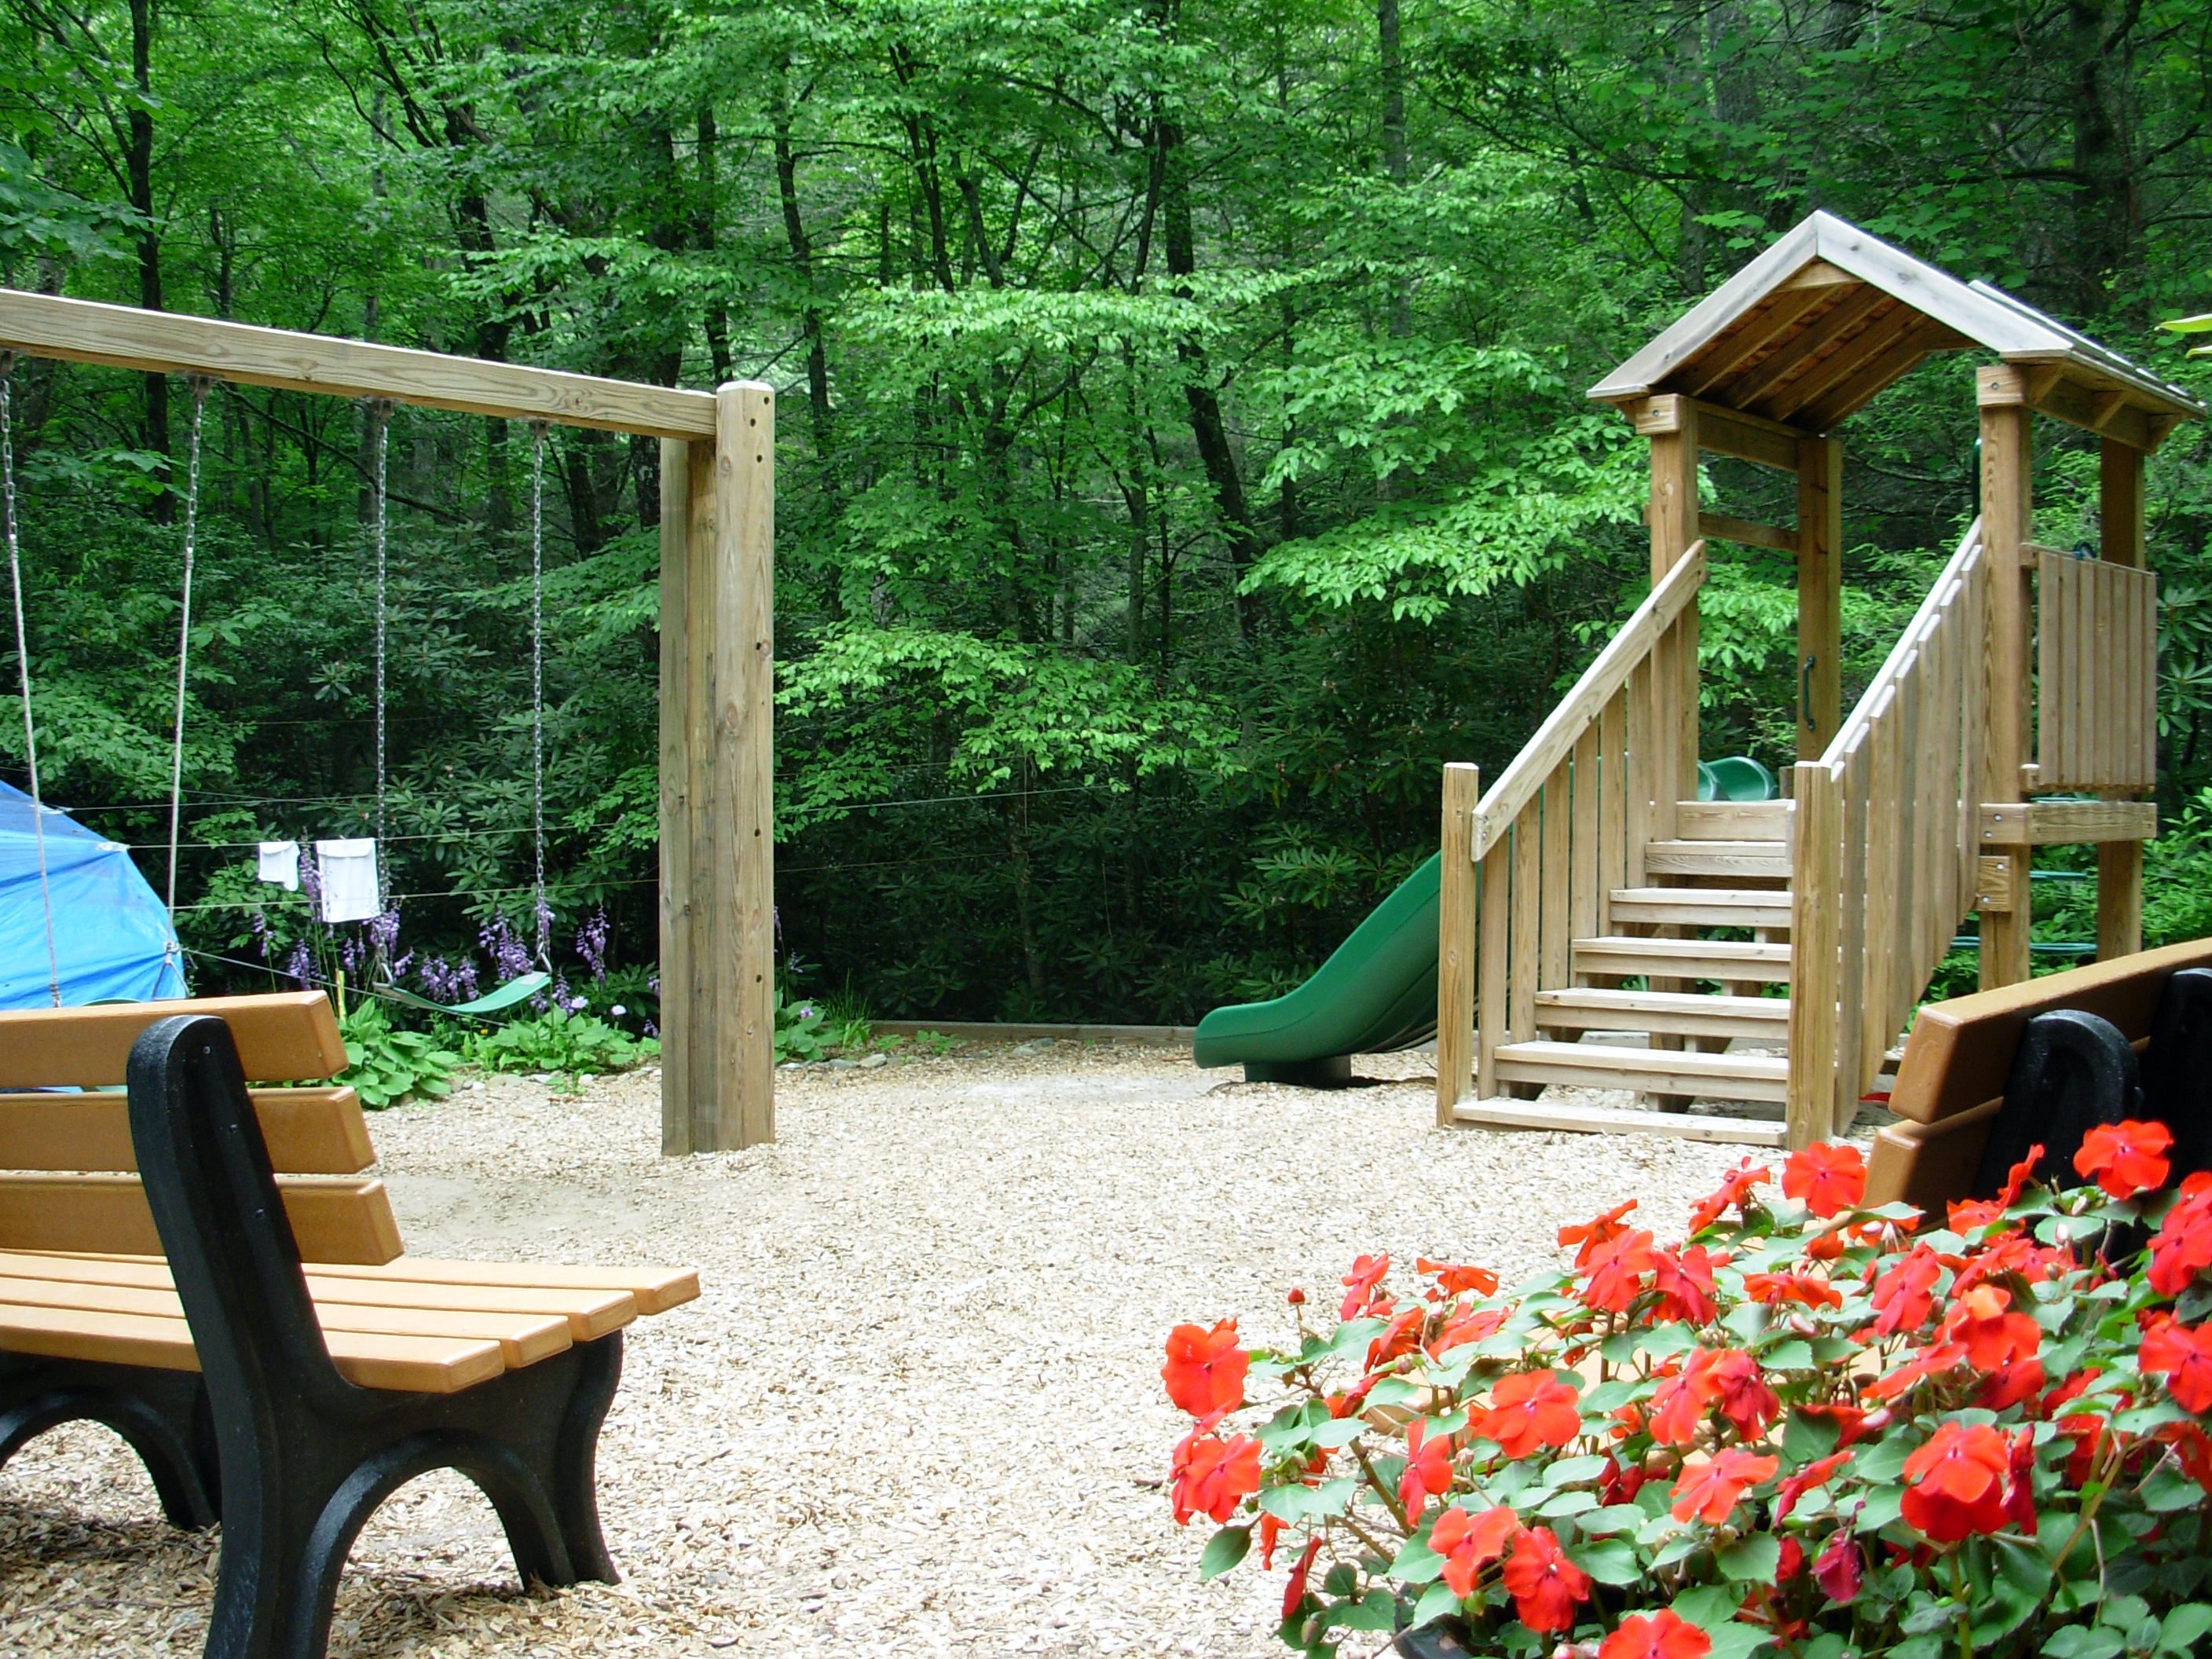 Empty Playground surrounded by trees with flower bush in the foreground.